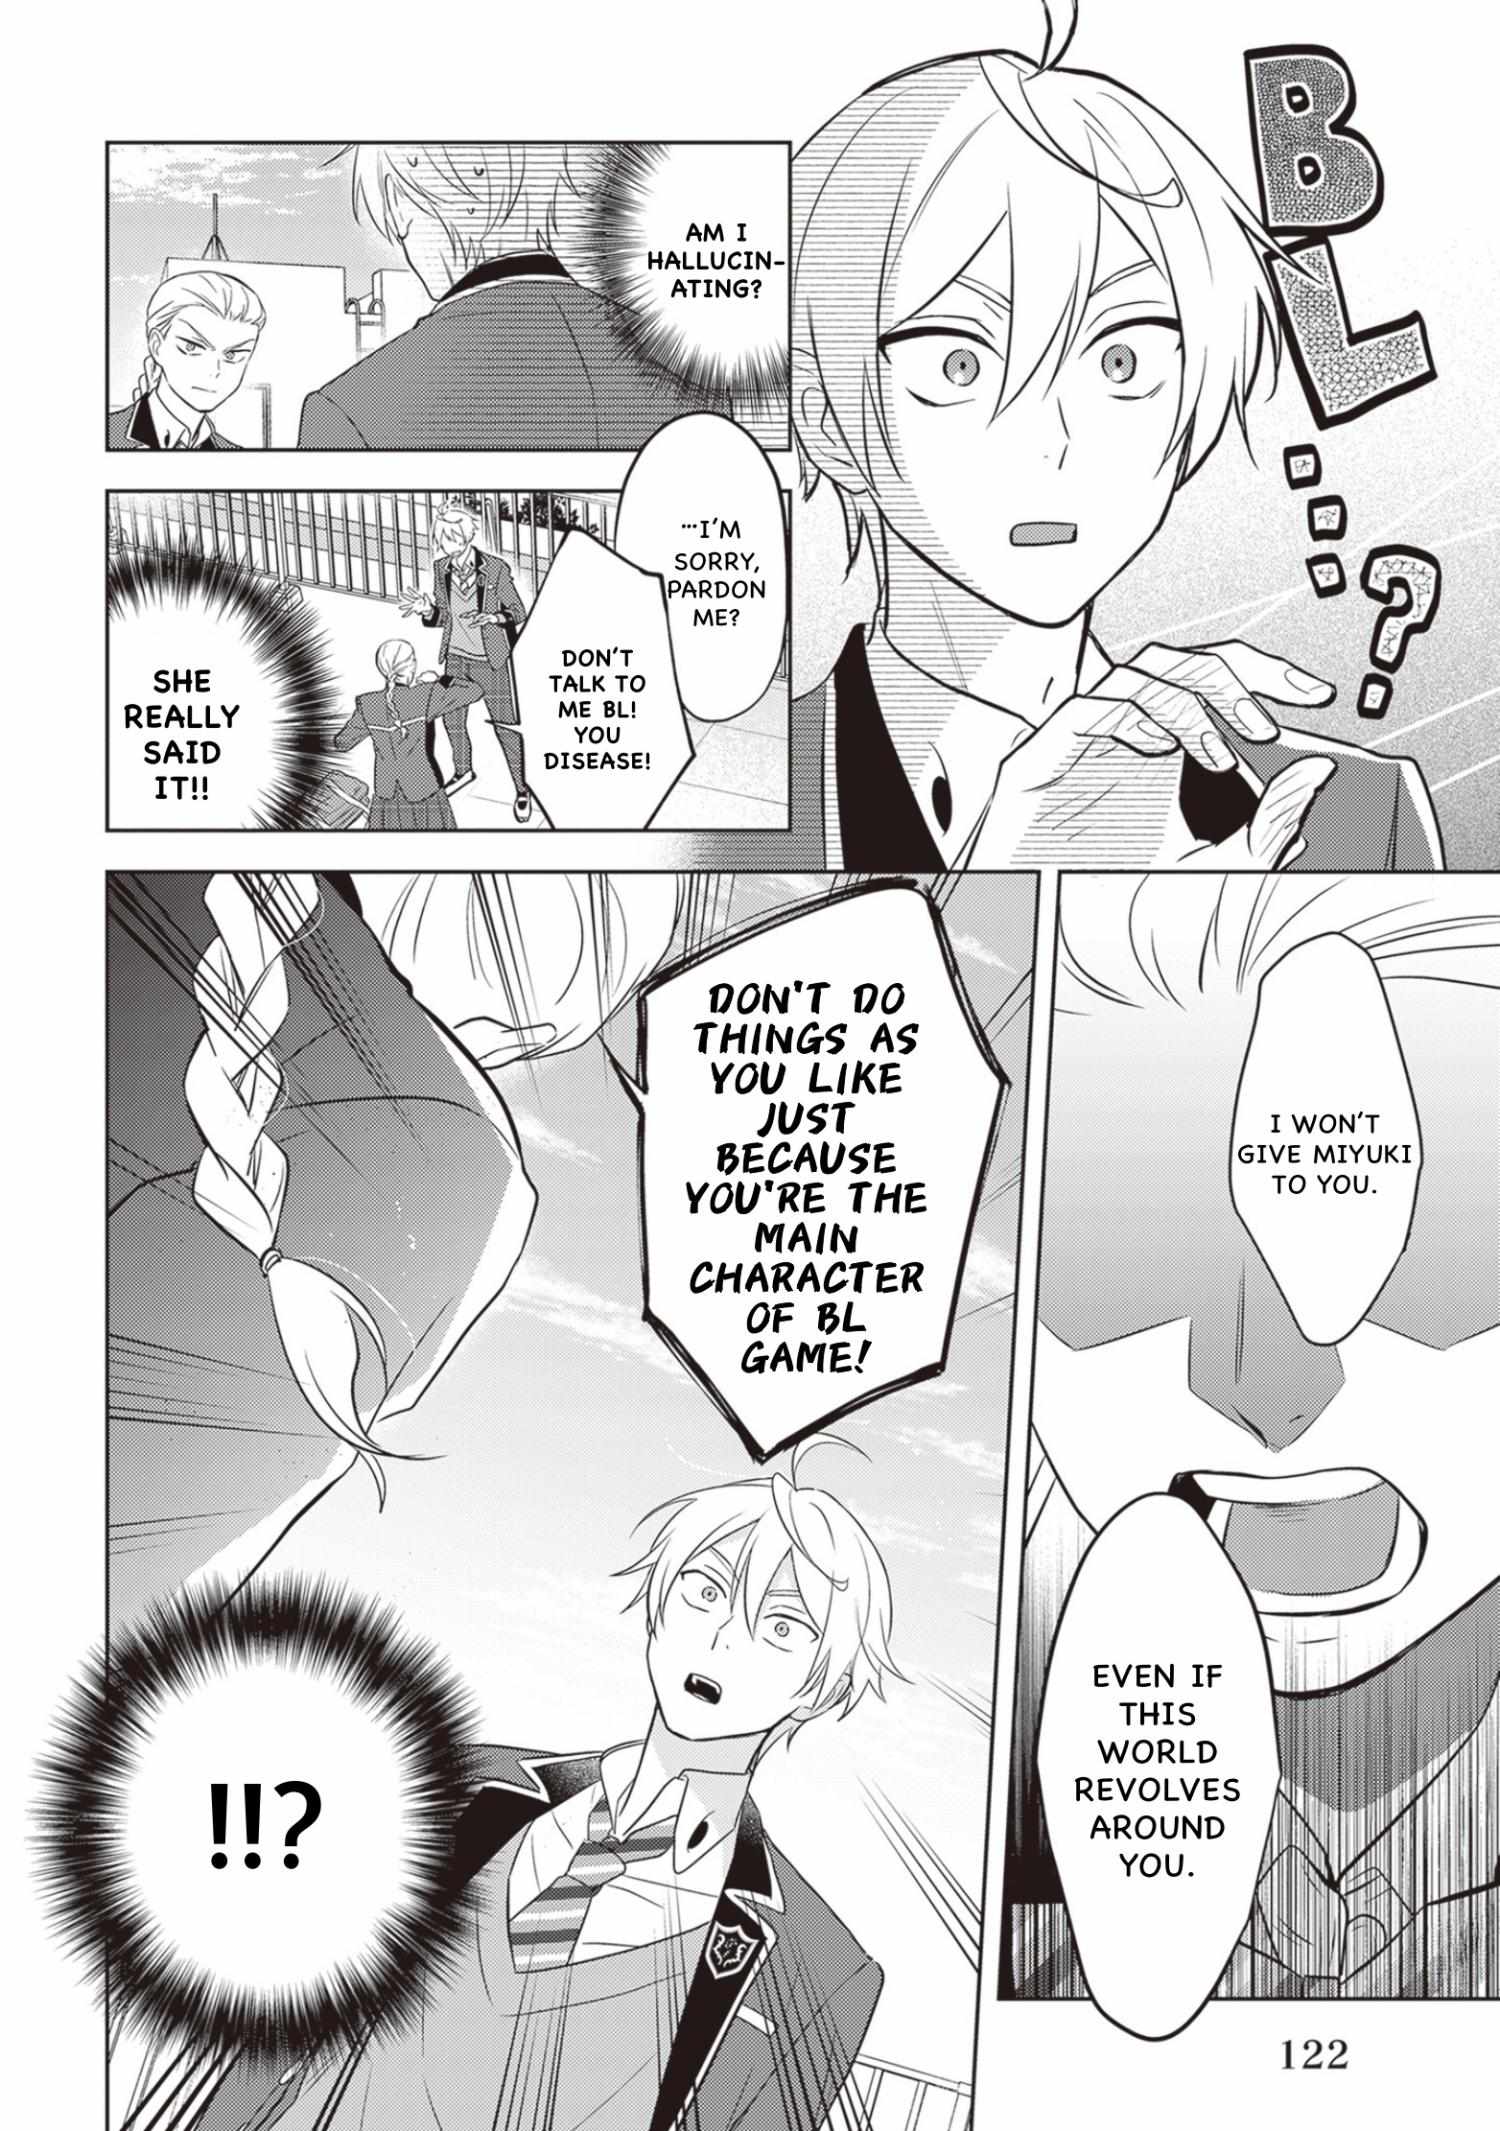 I Realized I Am The Younger Brother Of The Protagonist In A Bl Game - 12 page 8-4060058e